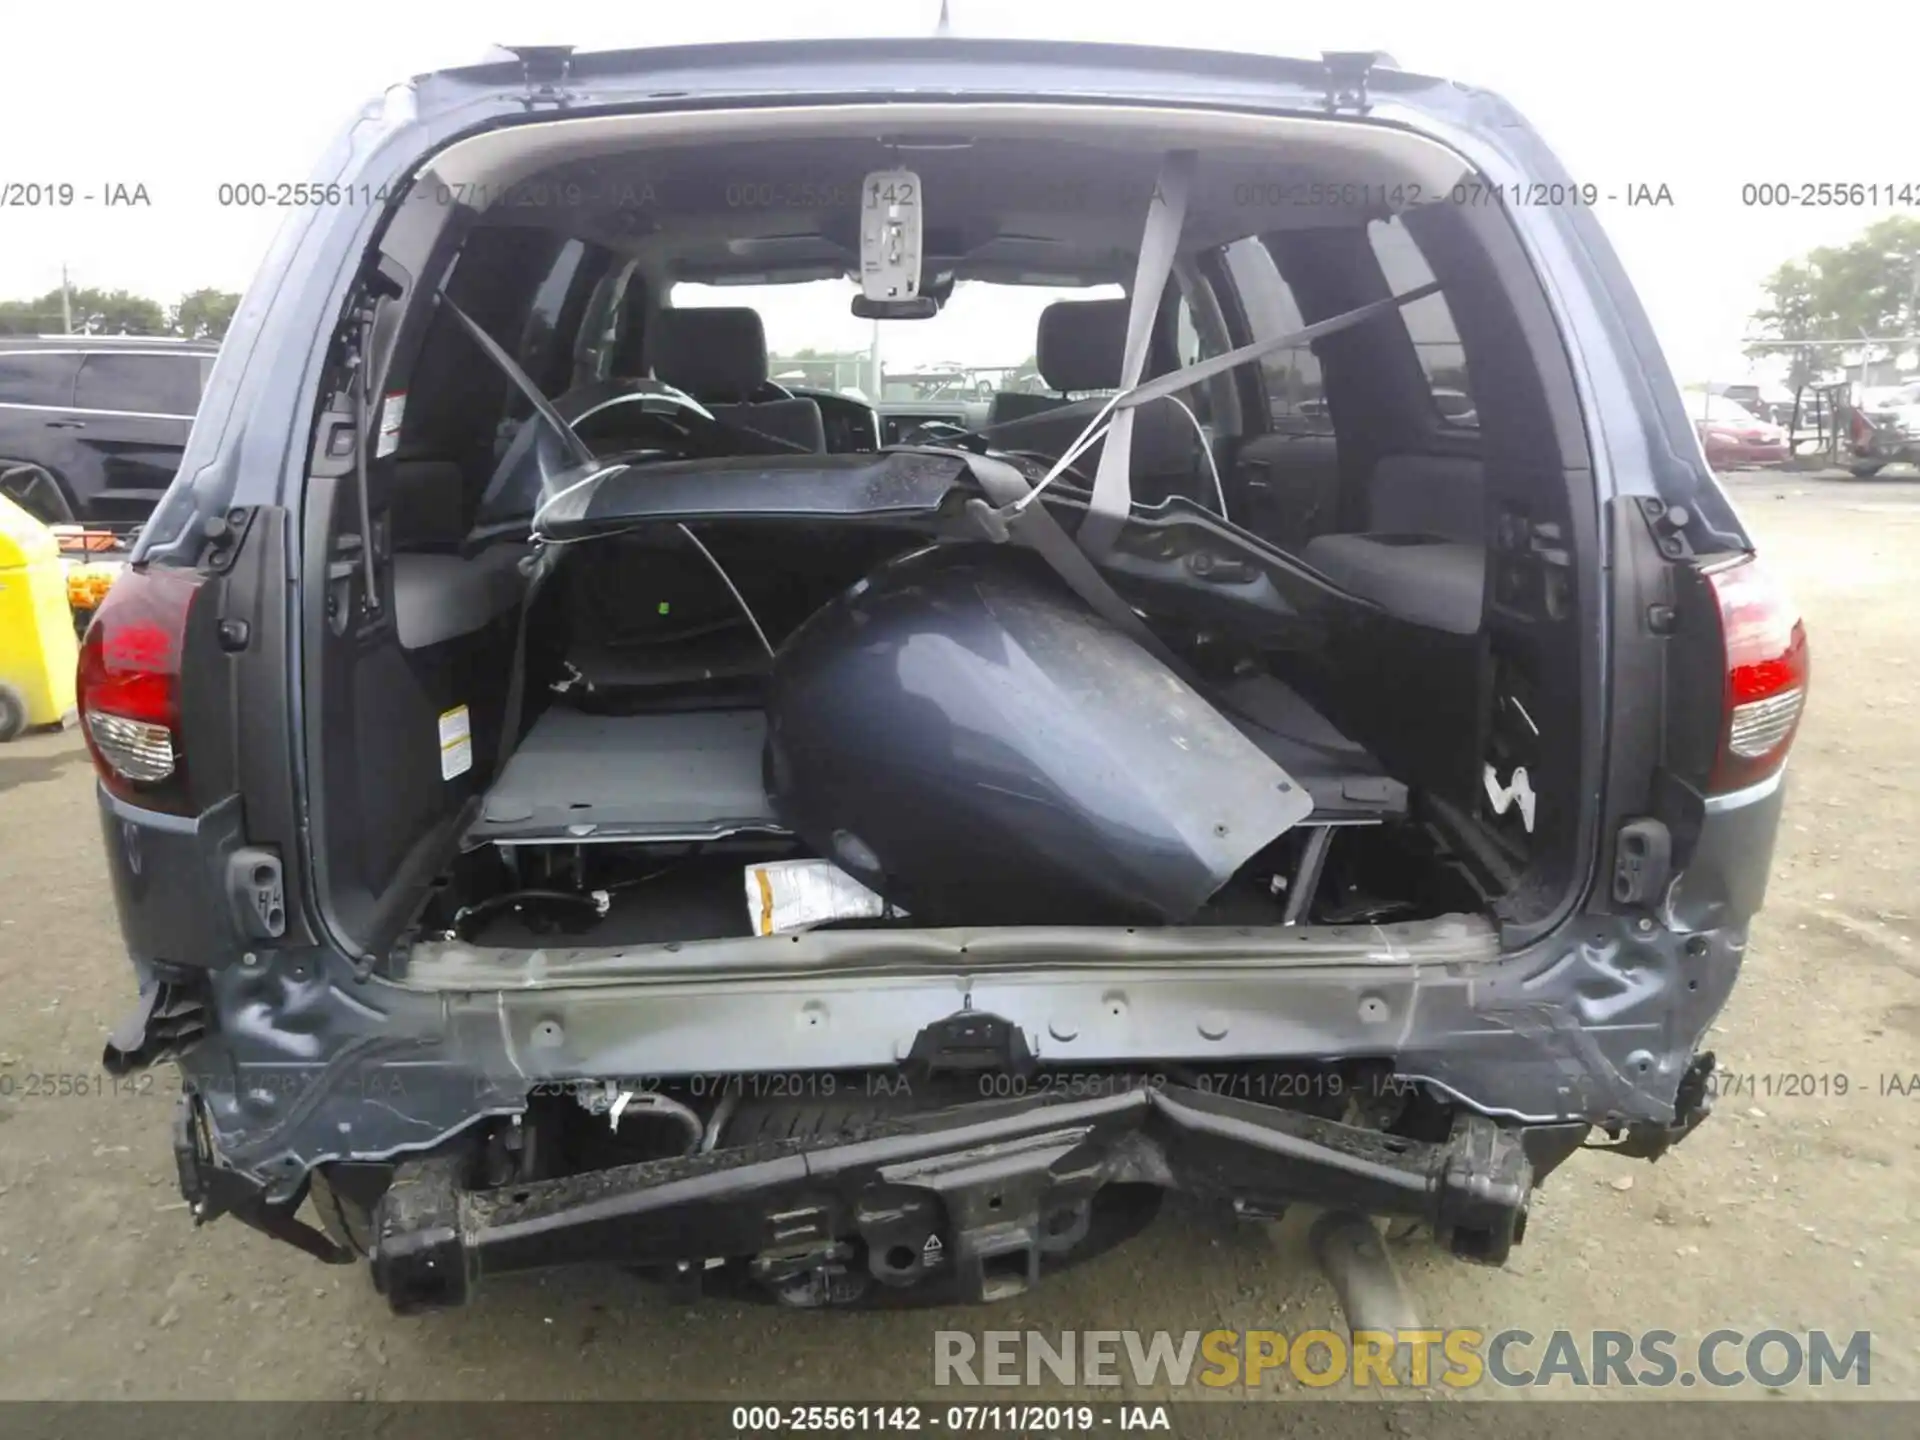 6 Photograph of a damaged car 5TDDY5G19KS165664 TOYOTA SEQUOIA 2019